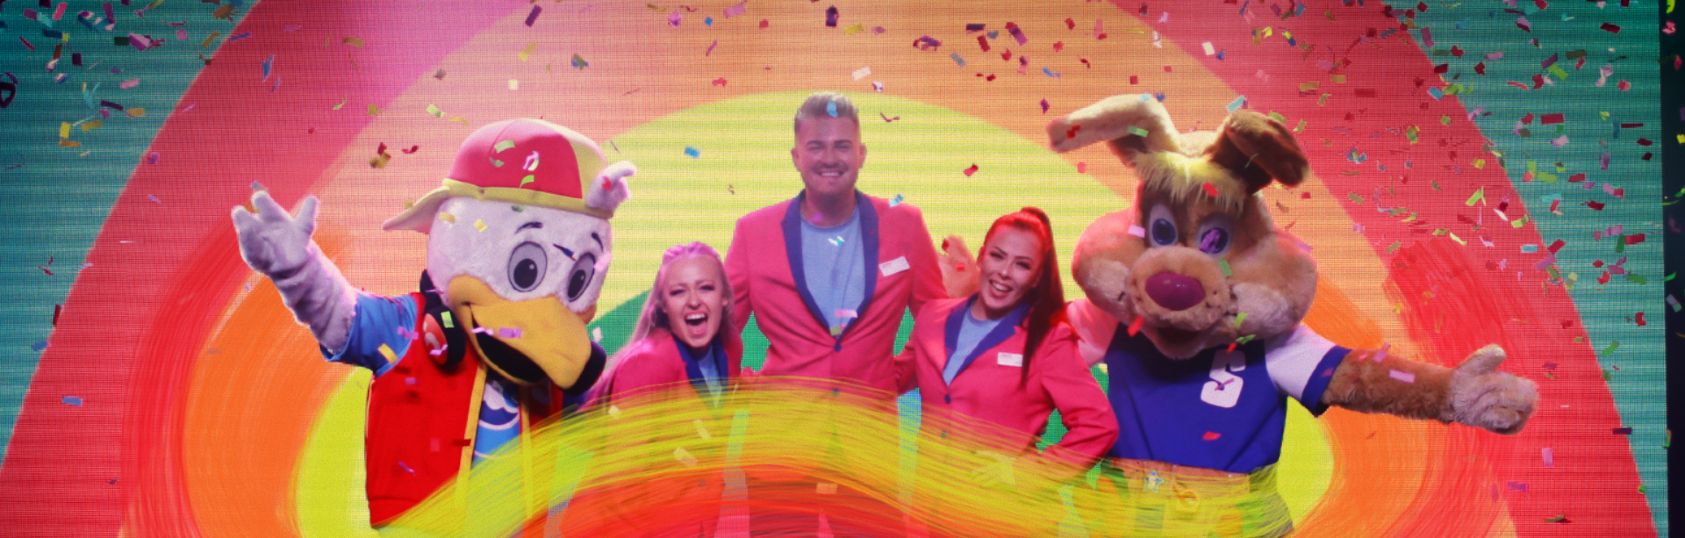 4 entertainers stand on stage with rainbow graphic